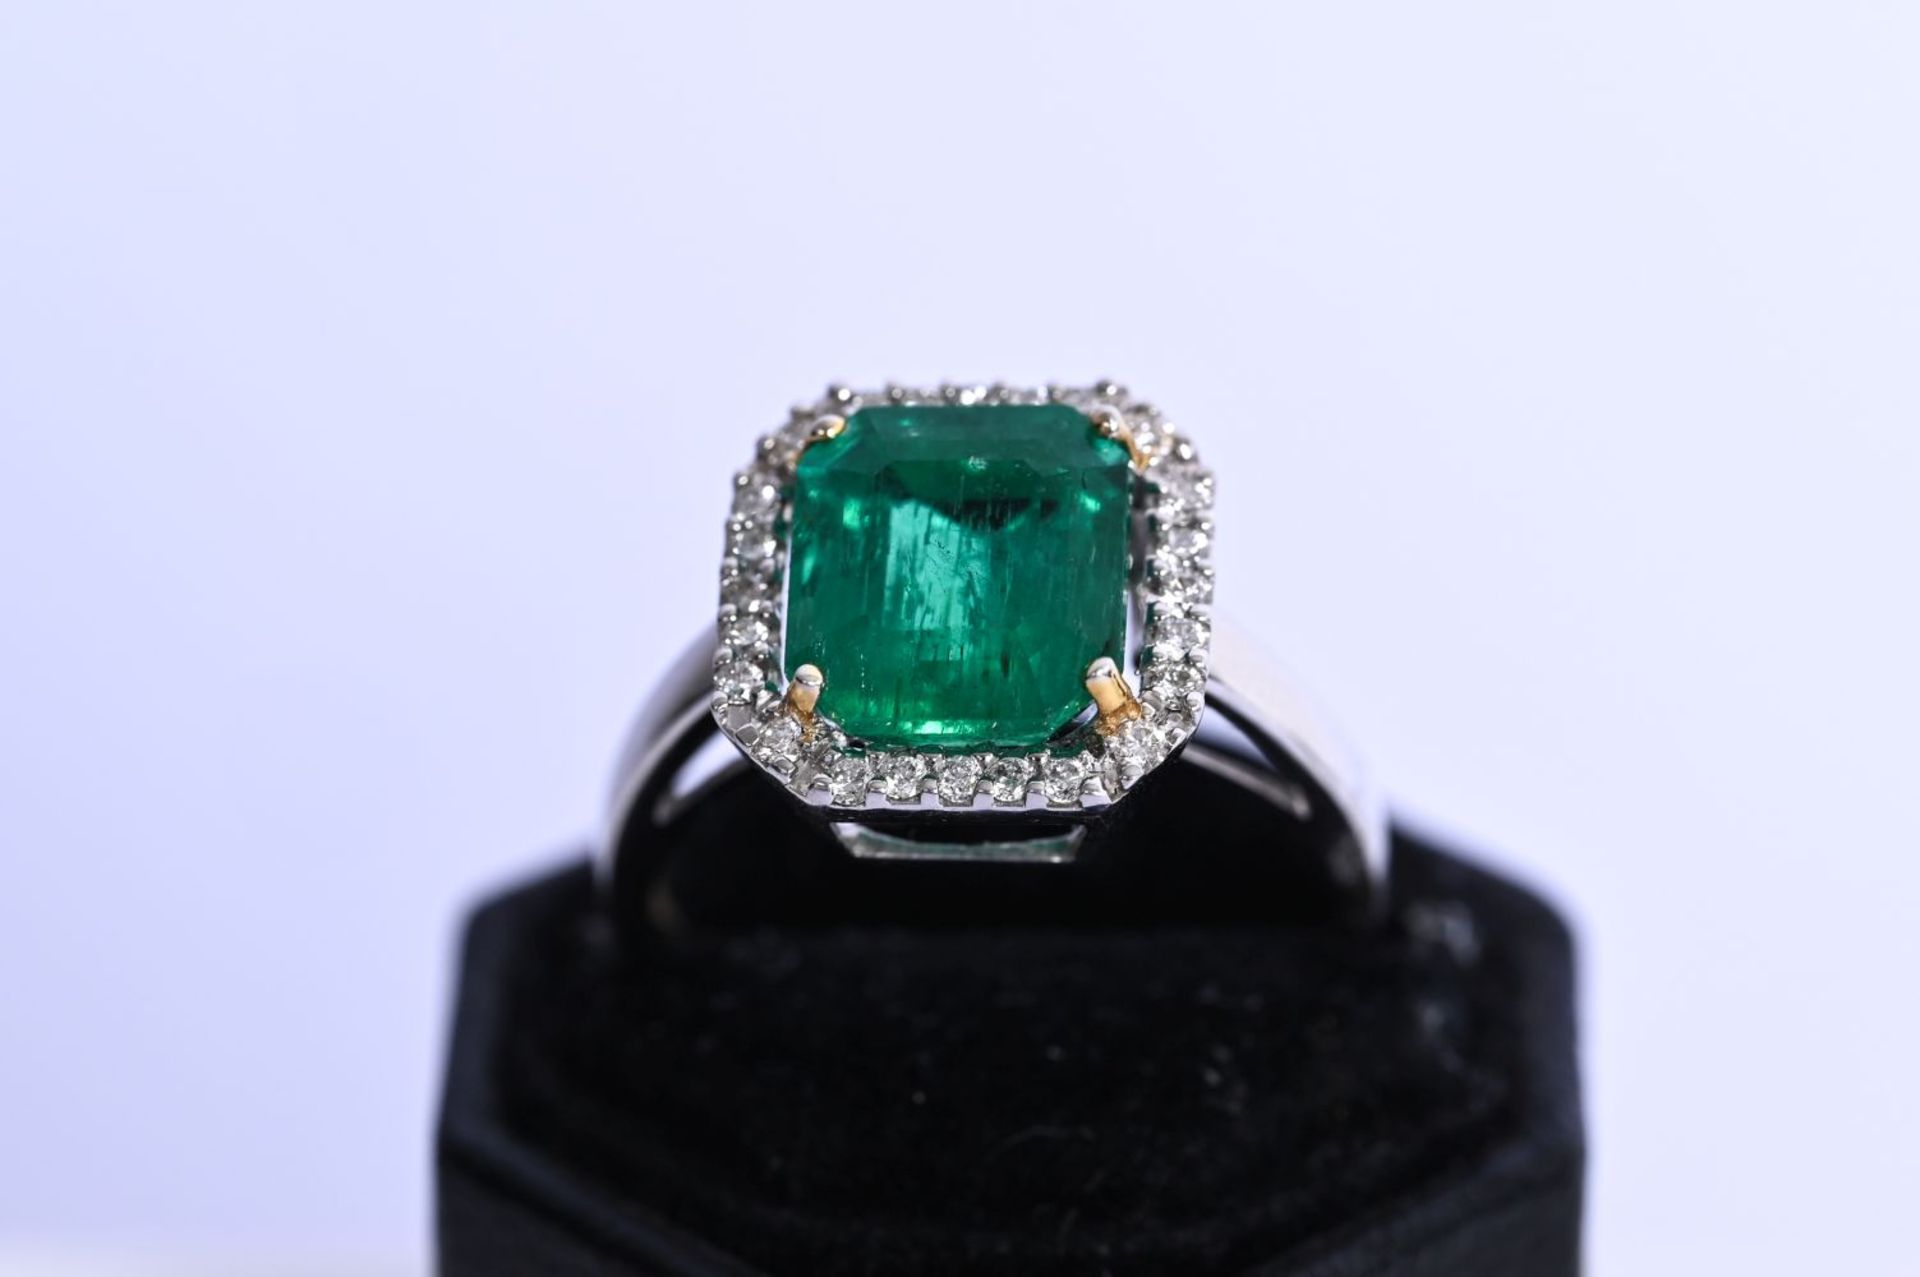 18K WHITE GOLD NATURAL COLOMBIAN EMERALD RING - Image 2 of 2